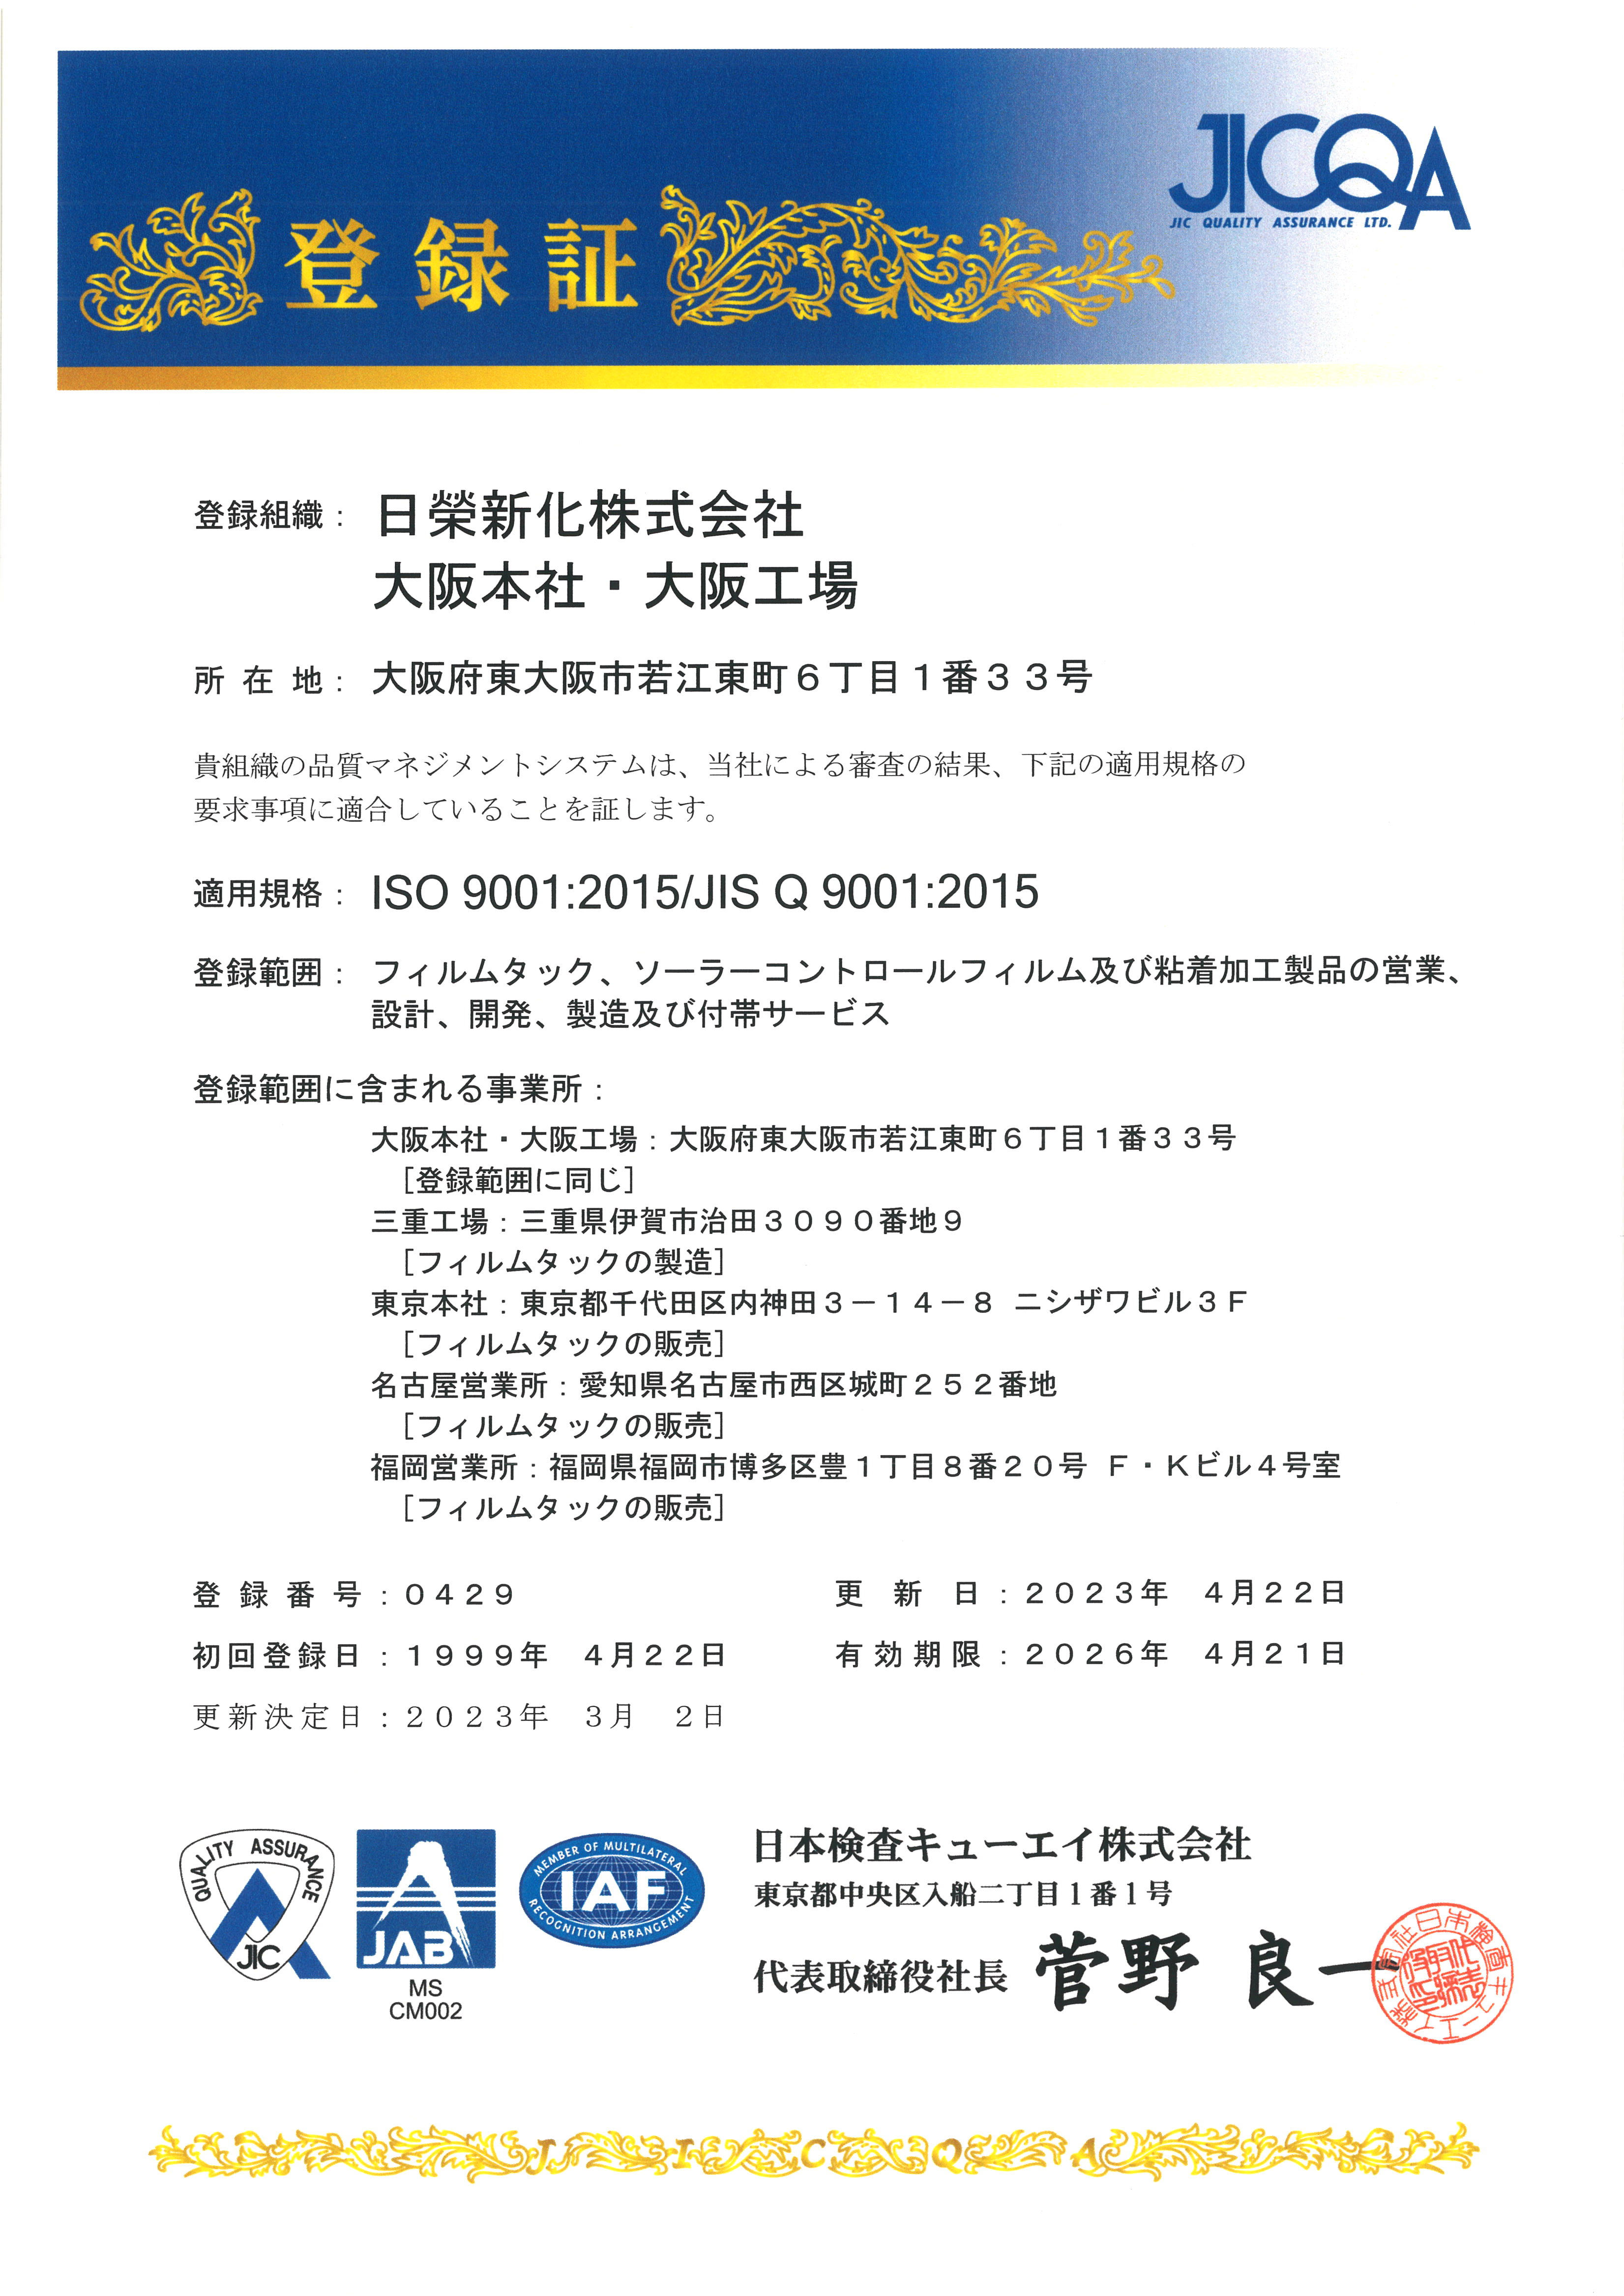 Acquired ISO9001 & ISO14001 certification